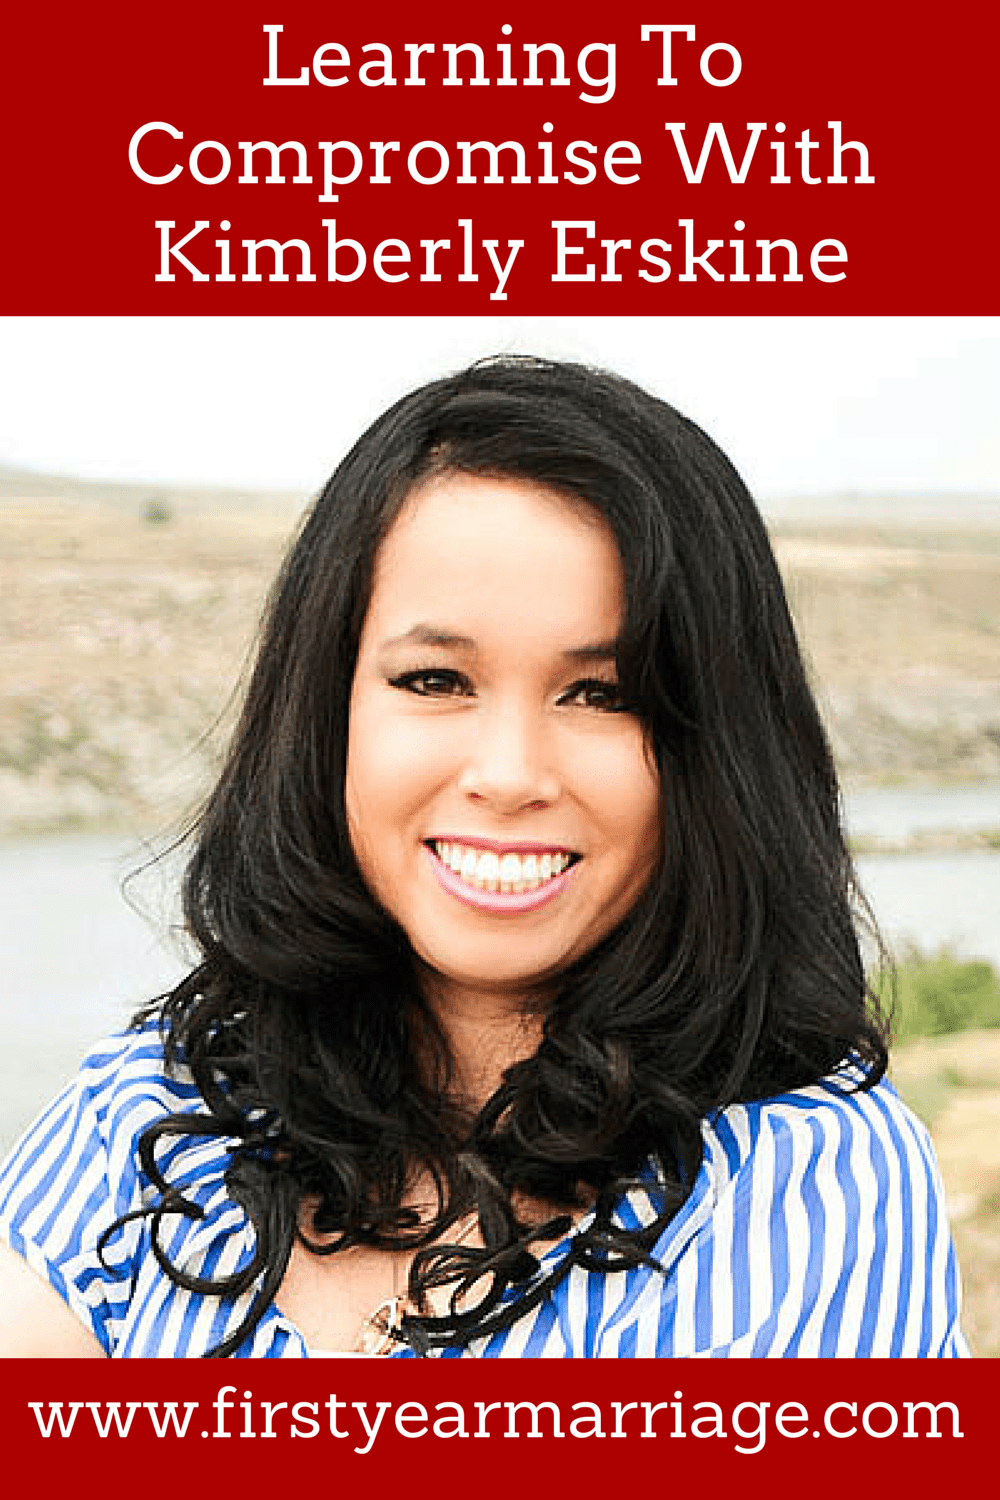 Learning To Compromise With Kimberly Erskine